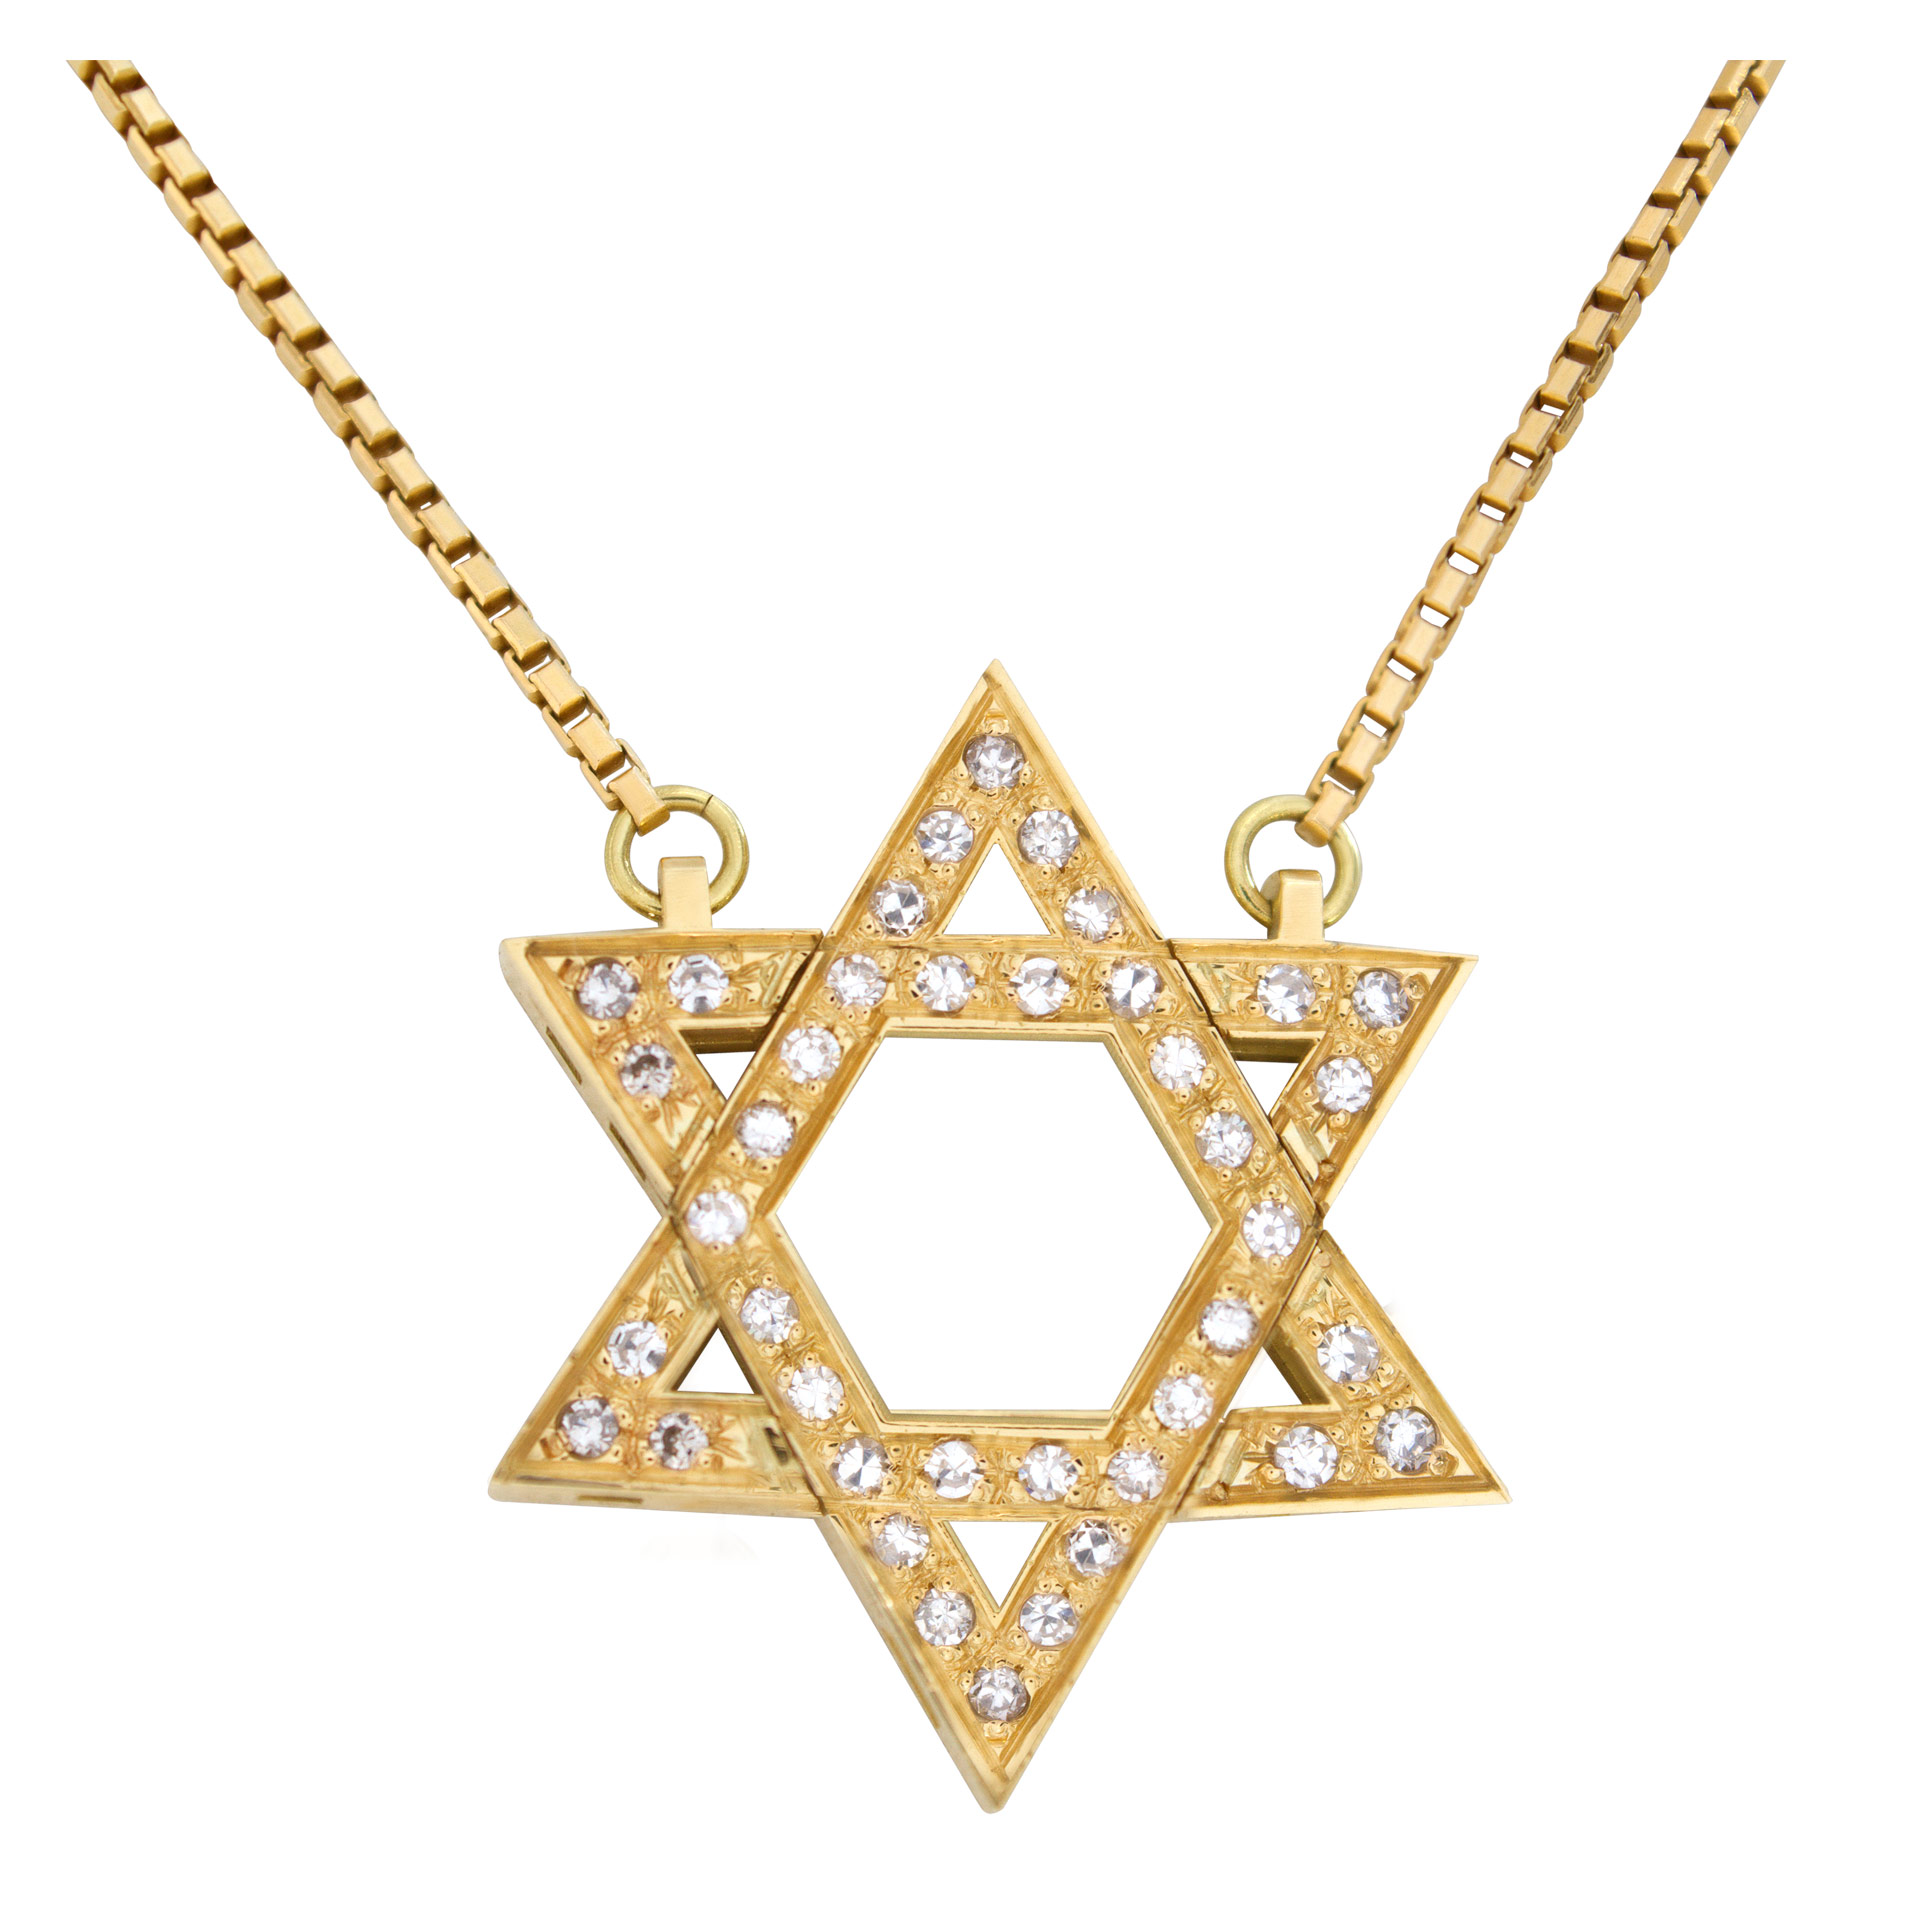 "Star of David" pendant with approximately 0.75 carat pave diamonds set in 18k yellow gold image 2